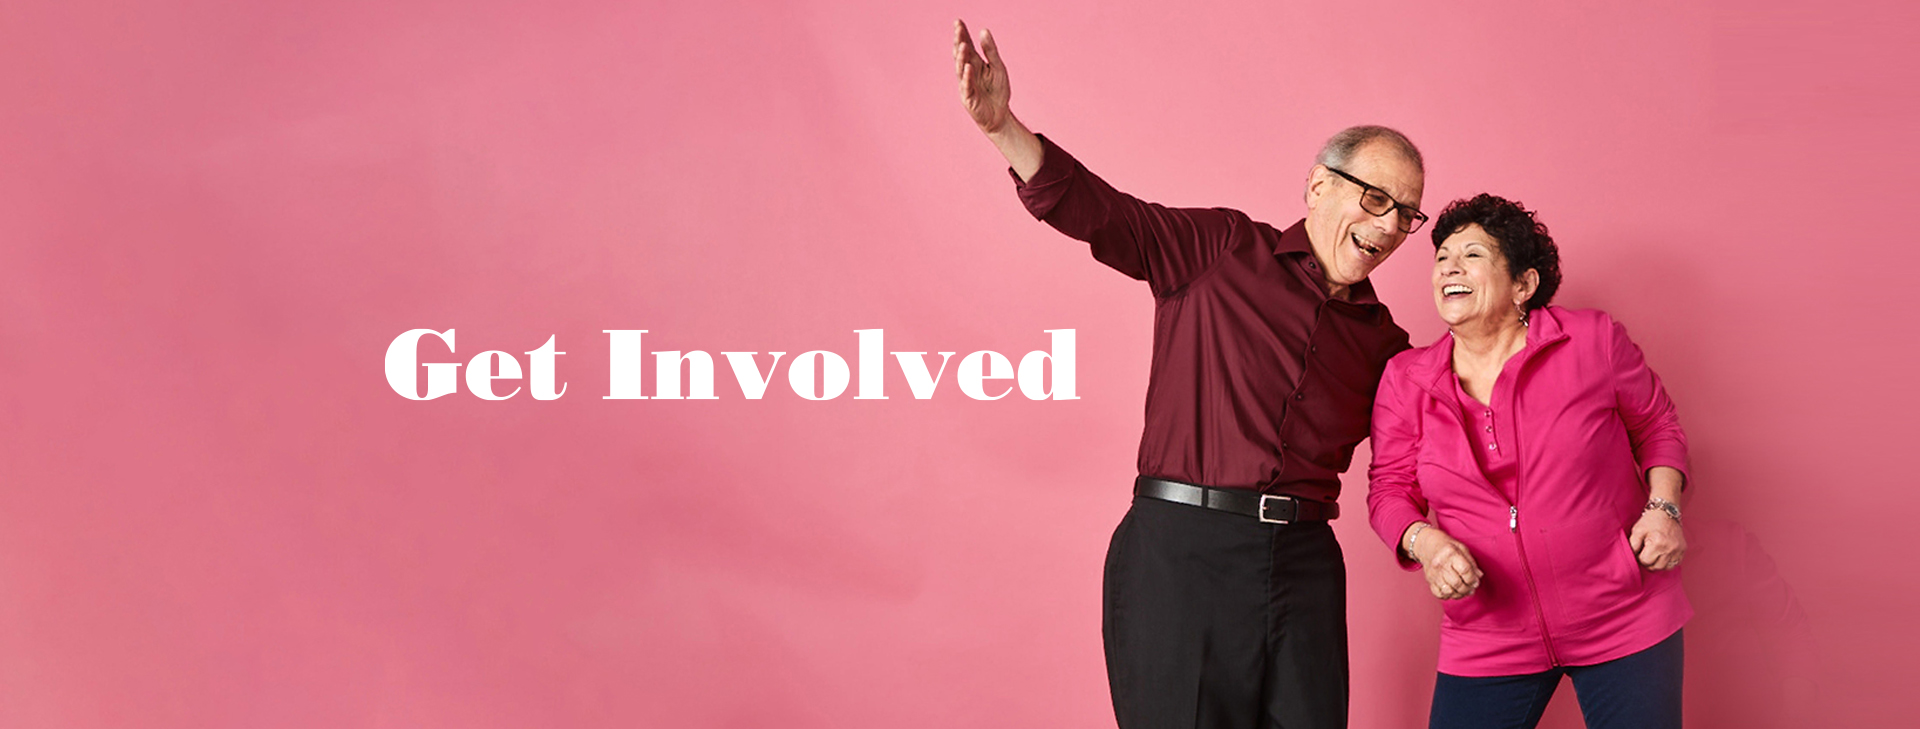 Get Involved banner with two people against a dark pink background